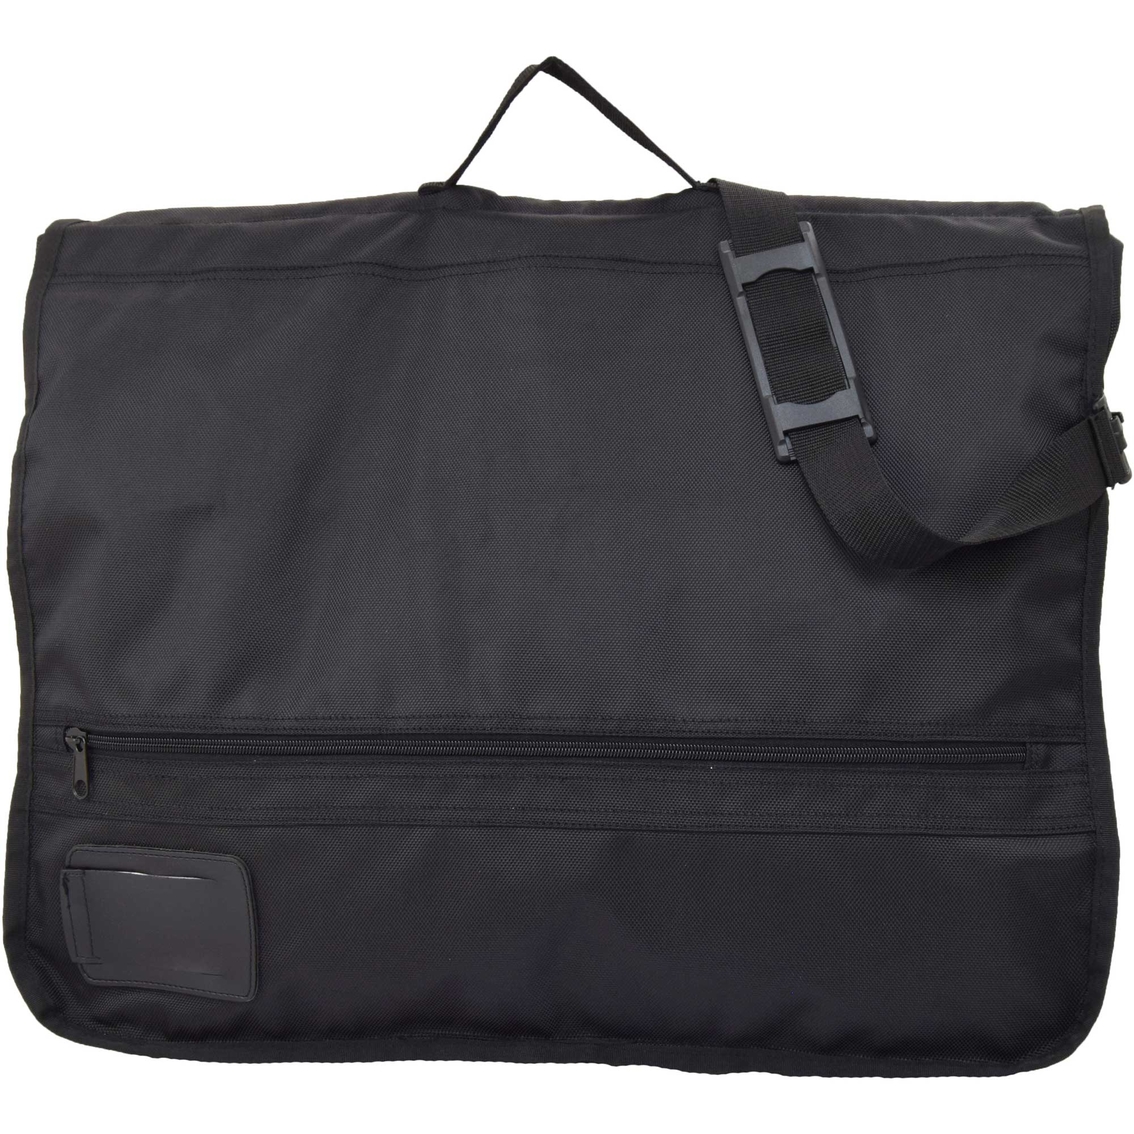 Flying Circle Hanging Garment Bag | Luggage | Clothing & Accessories ...